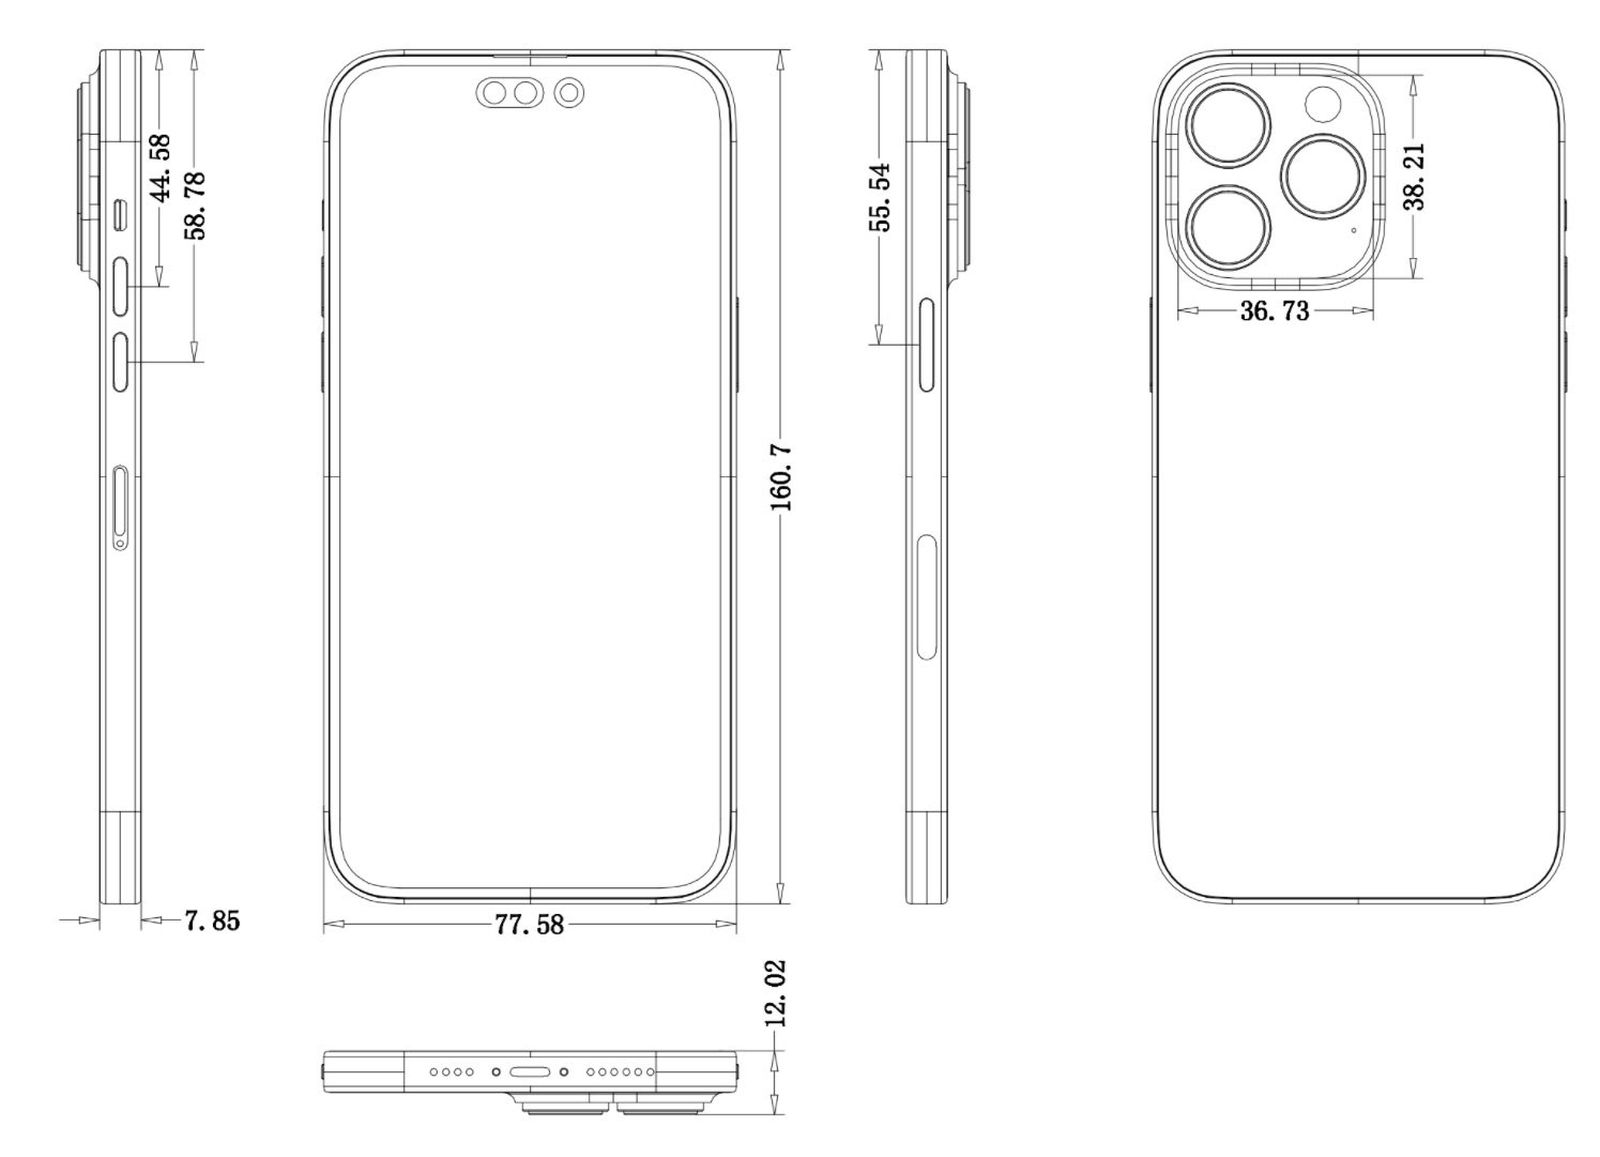 iPhone 14 Pro and iPhone 14 Pro Max Schematics Reveals Larger Camera Bump and Thicker Overall Design - macrumors.com